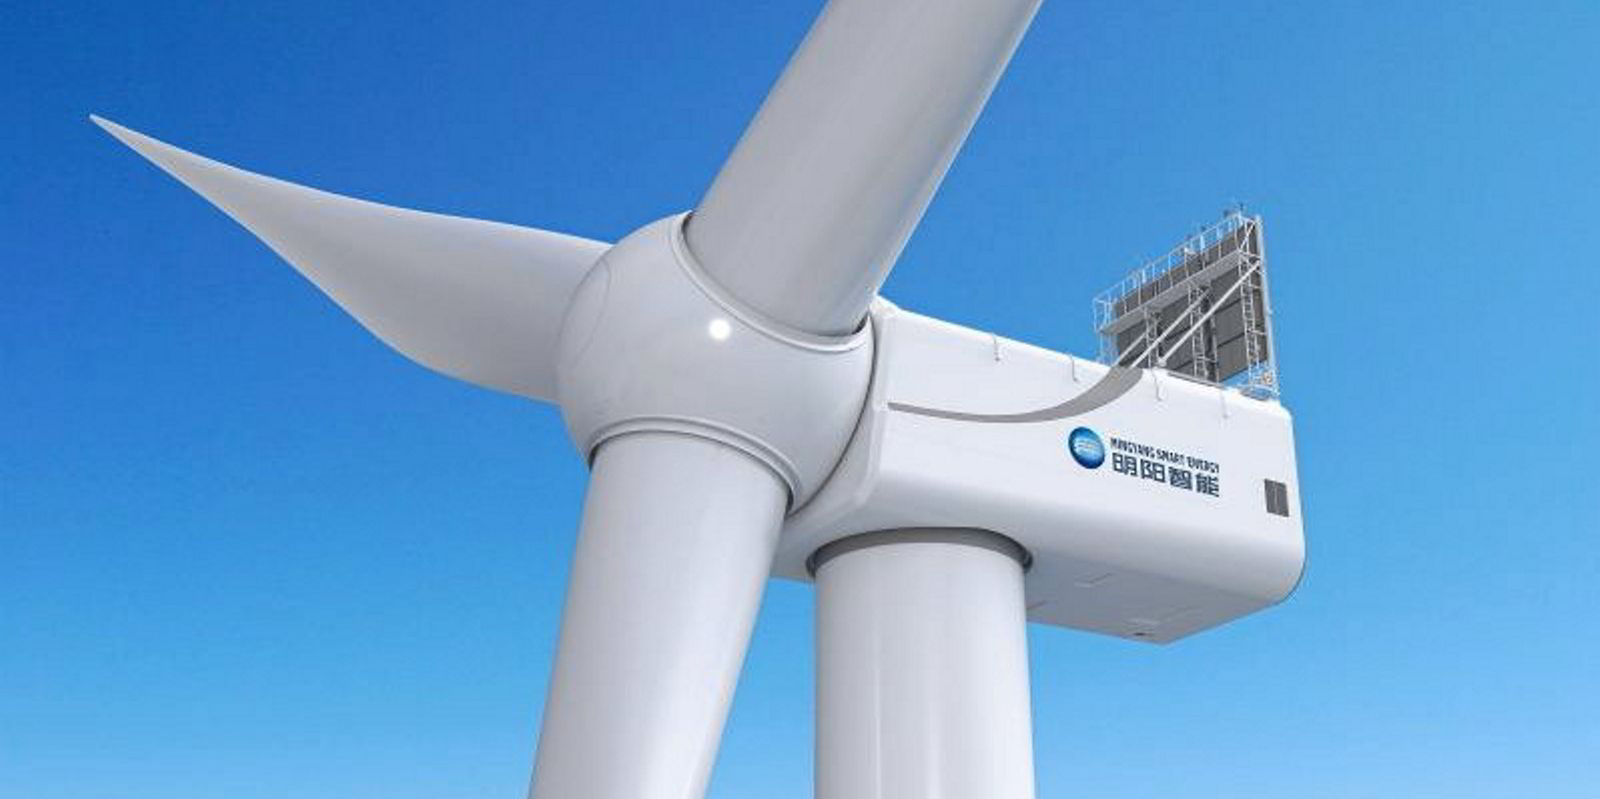 China's Mingyang looks 'beyond 18MW' with 140-metre blade offshore wind  turbine giant